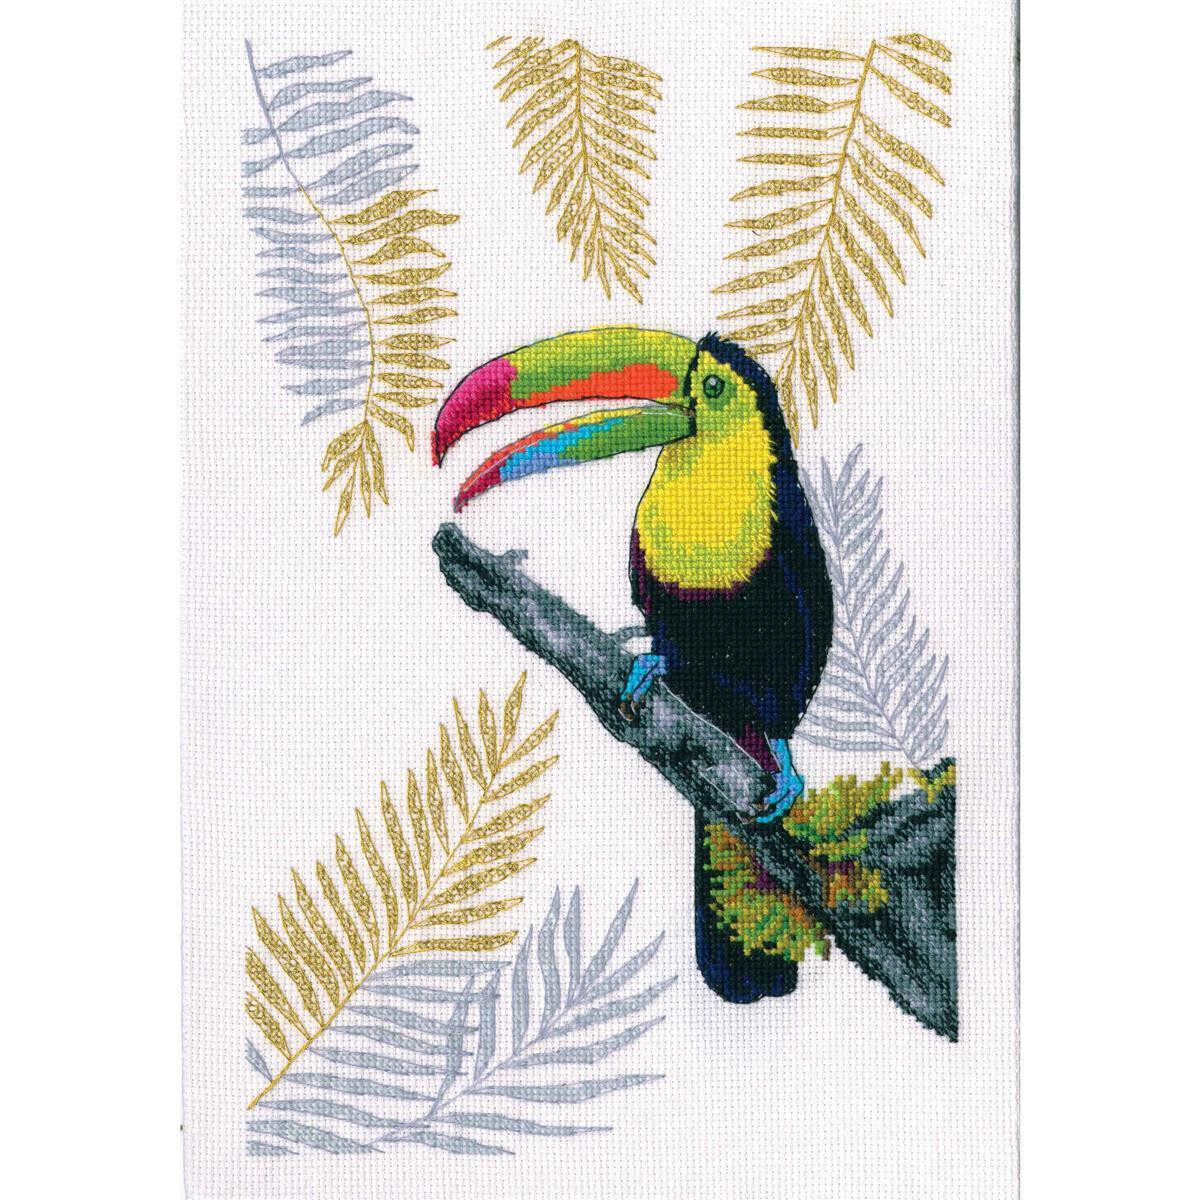 RTO counted Cross Stitch Kit "Toucan " M746,...